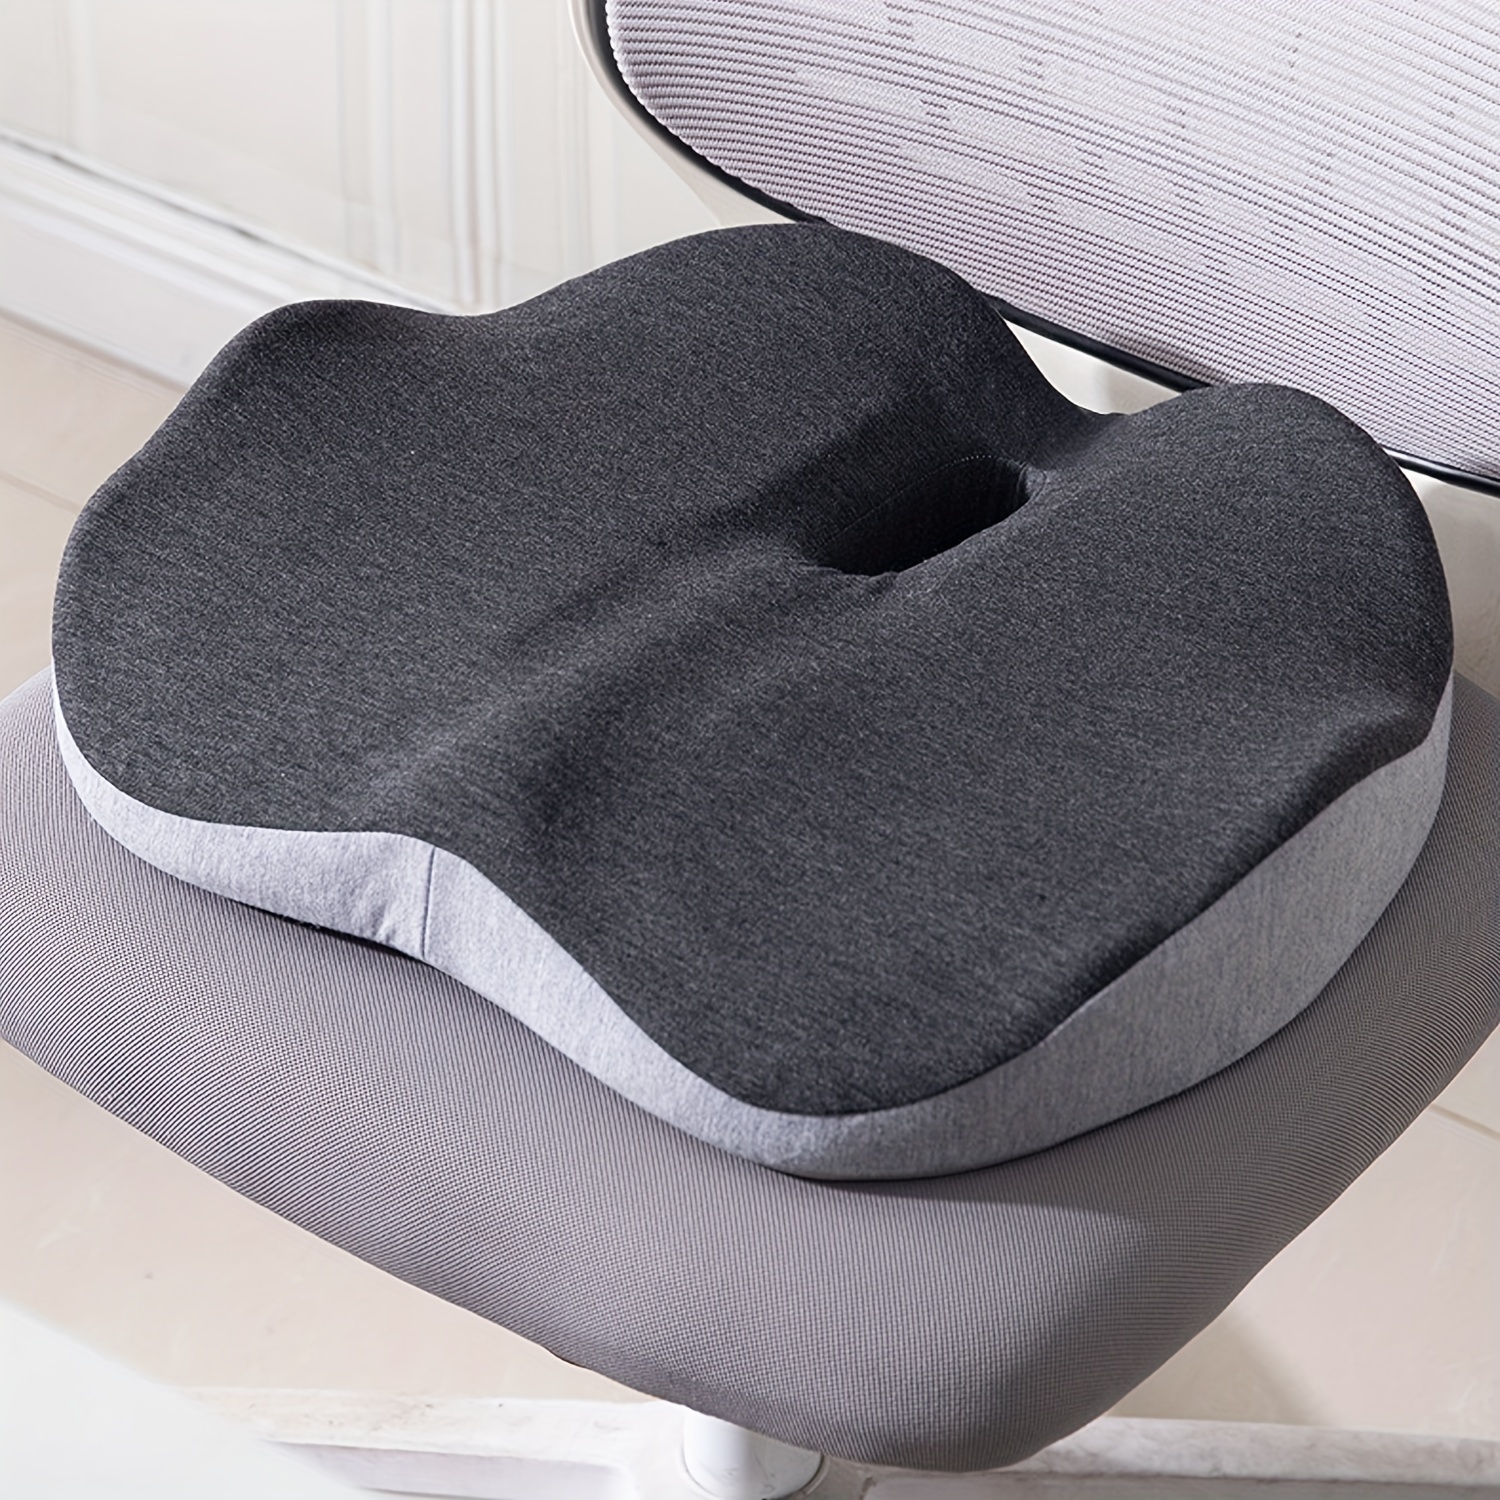 1PCS Donut Pillow Hemorrhoid Seat Cushion Tailbone Coccyx Orthopedic  Medical Seat Prostate Chair for Memory Foam